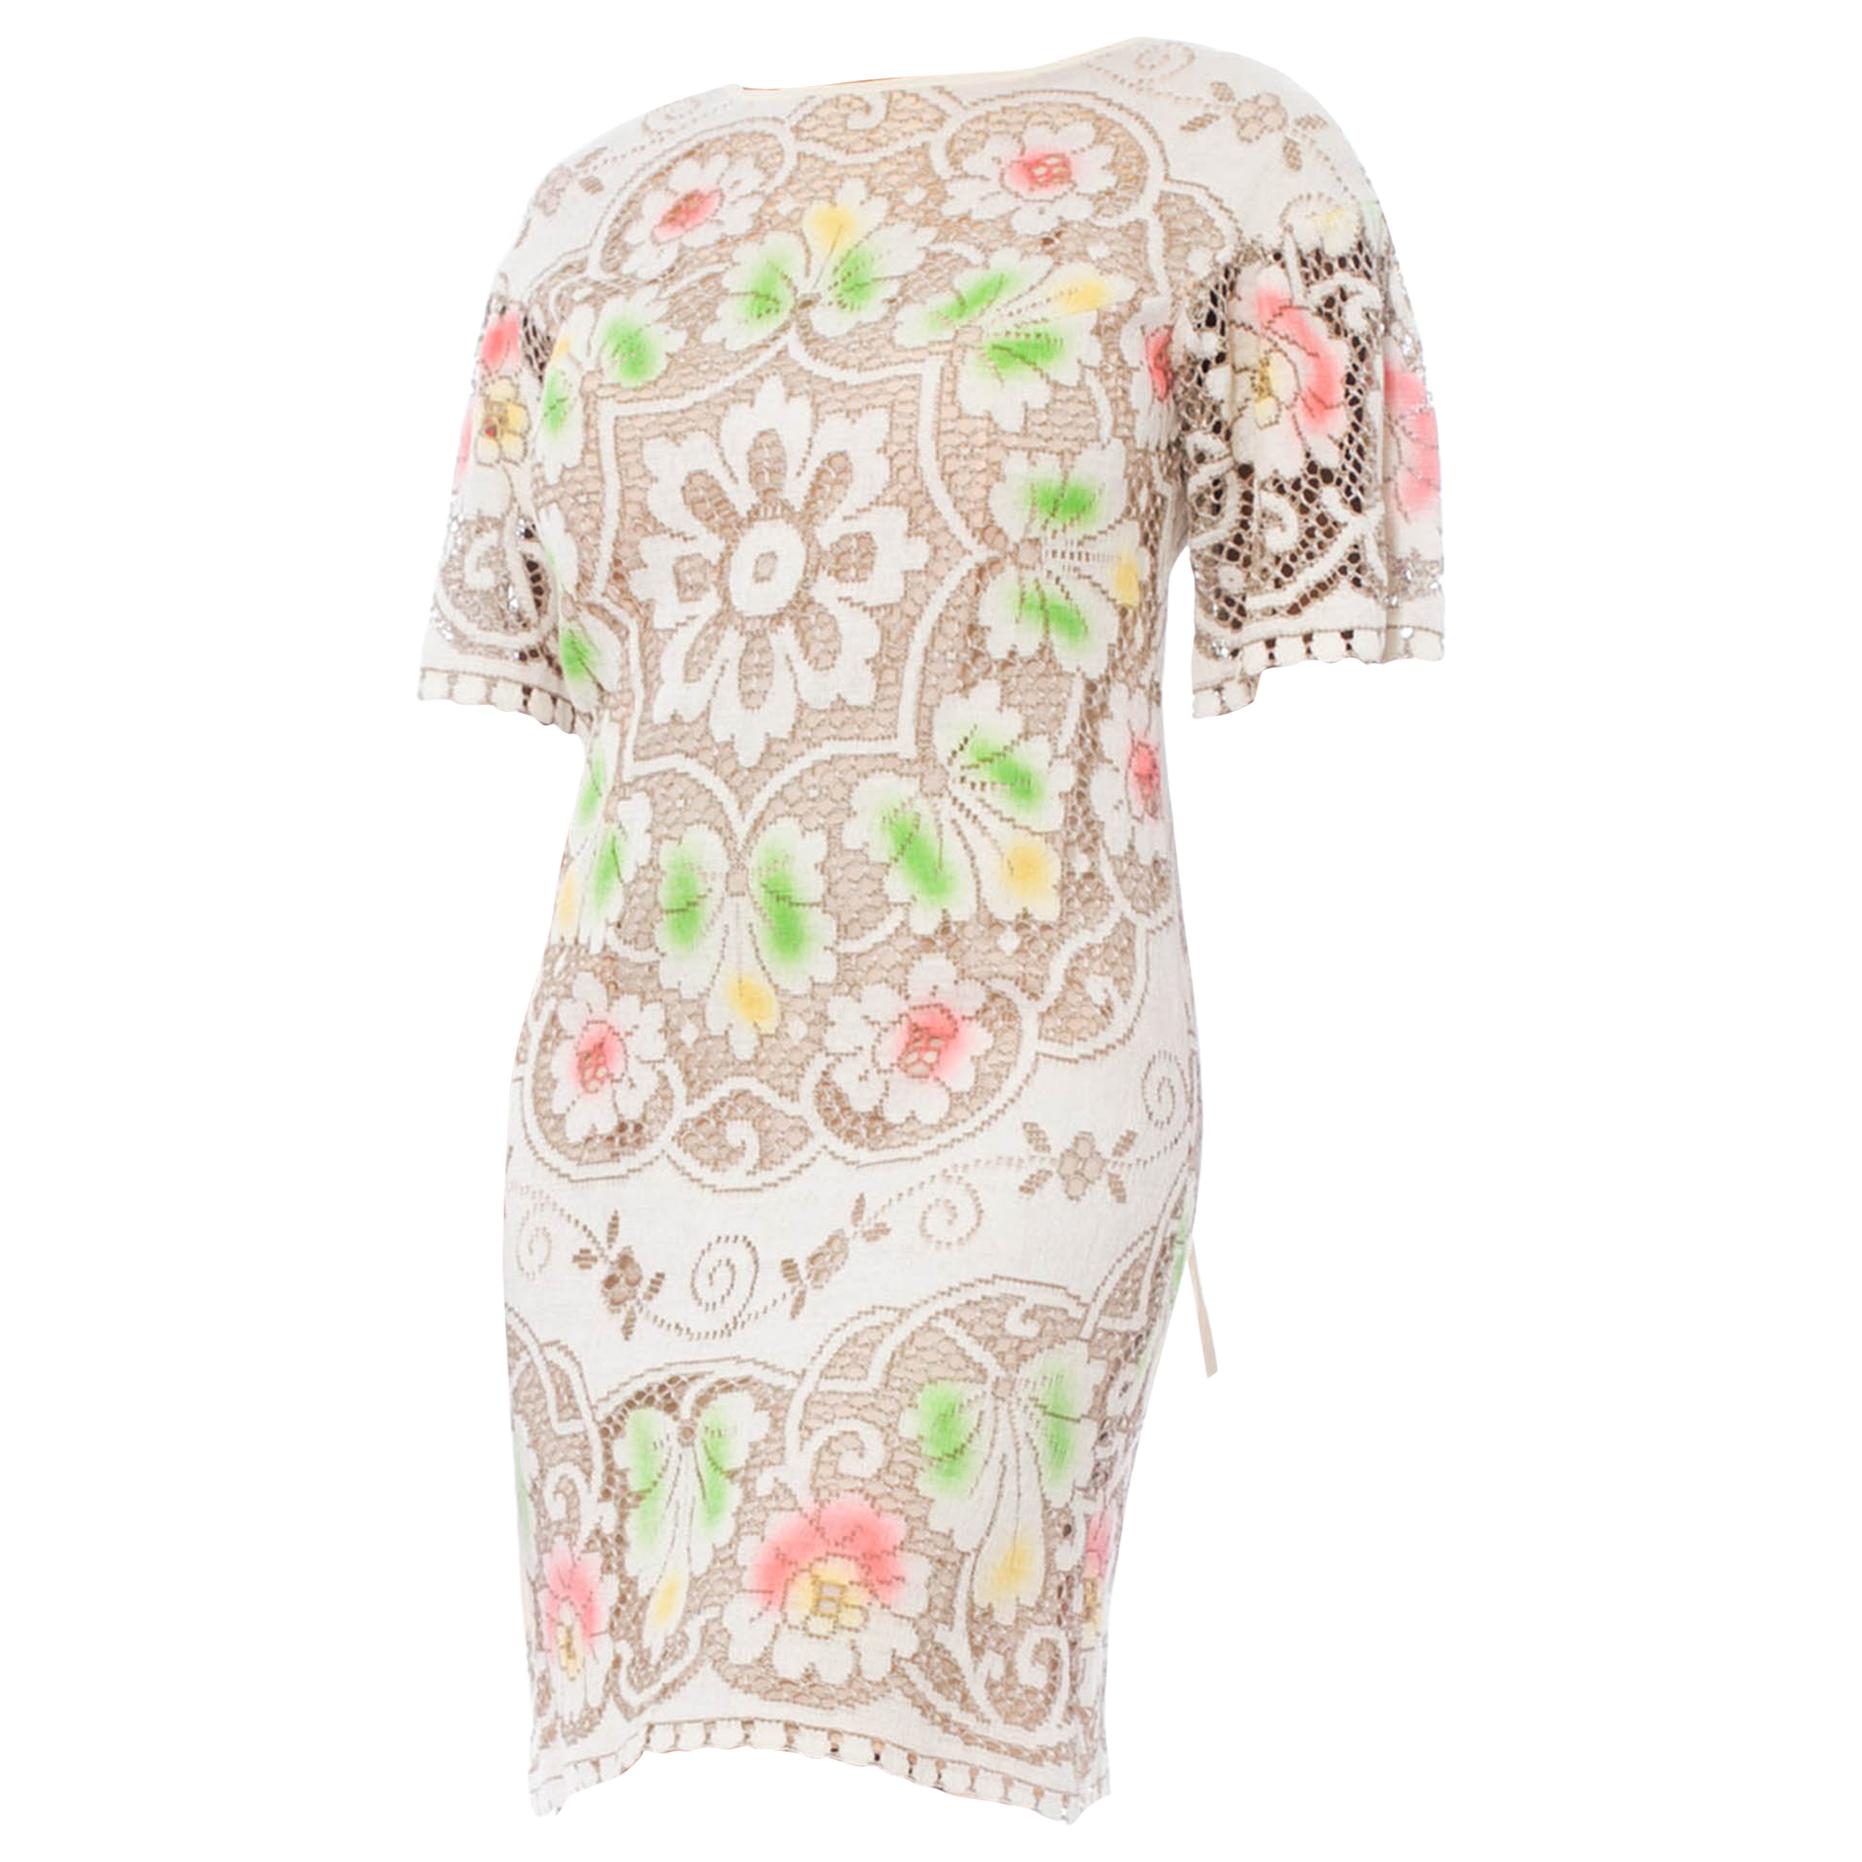 1960S Ivory Lace Dress With Sprayed Colorful Floral Highlights